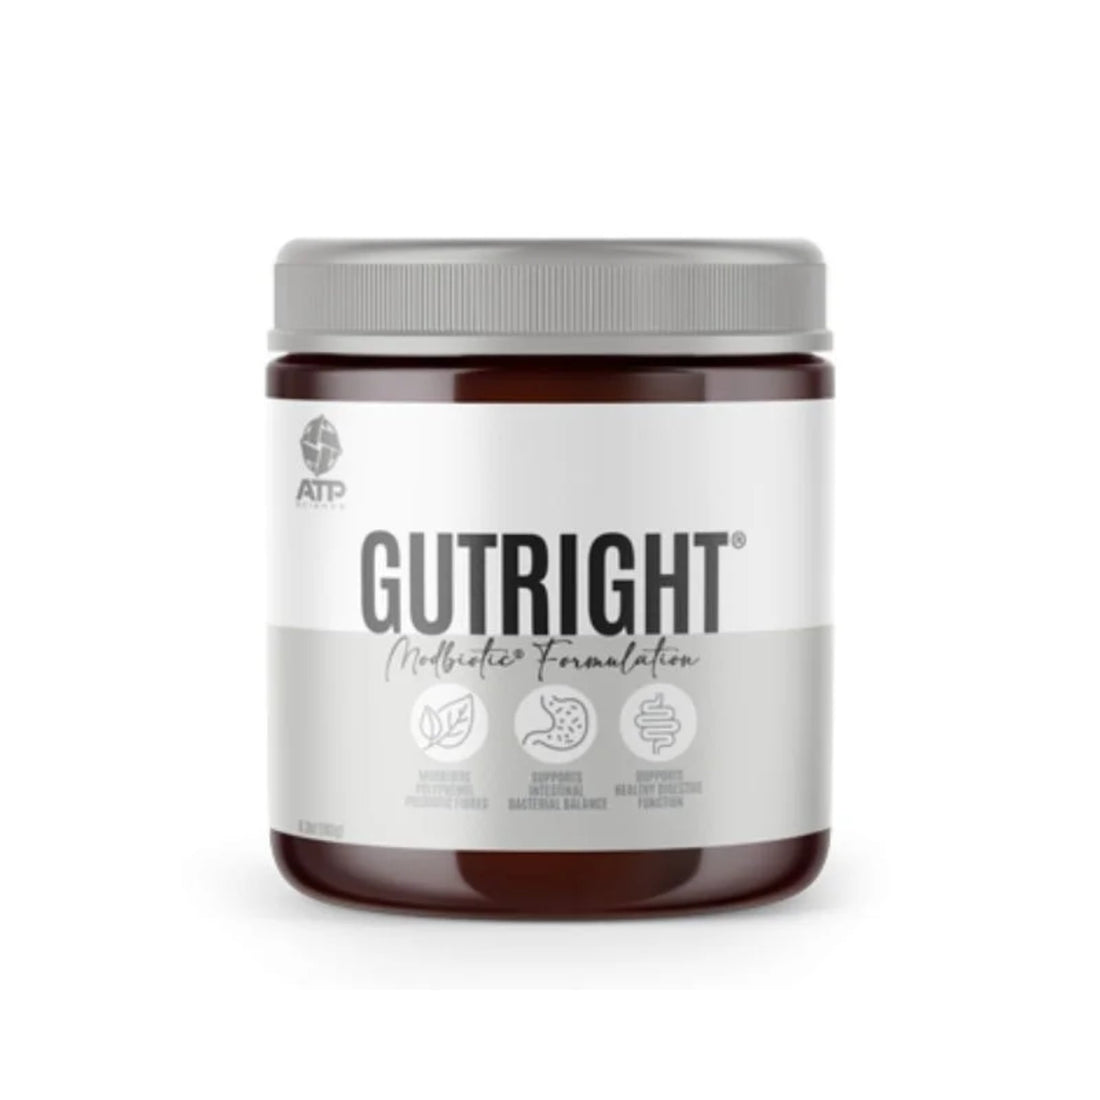 ATP Gut Right Vitamins and Health